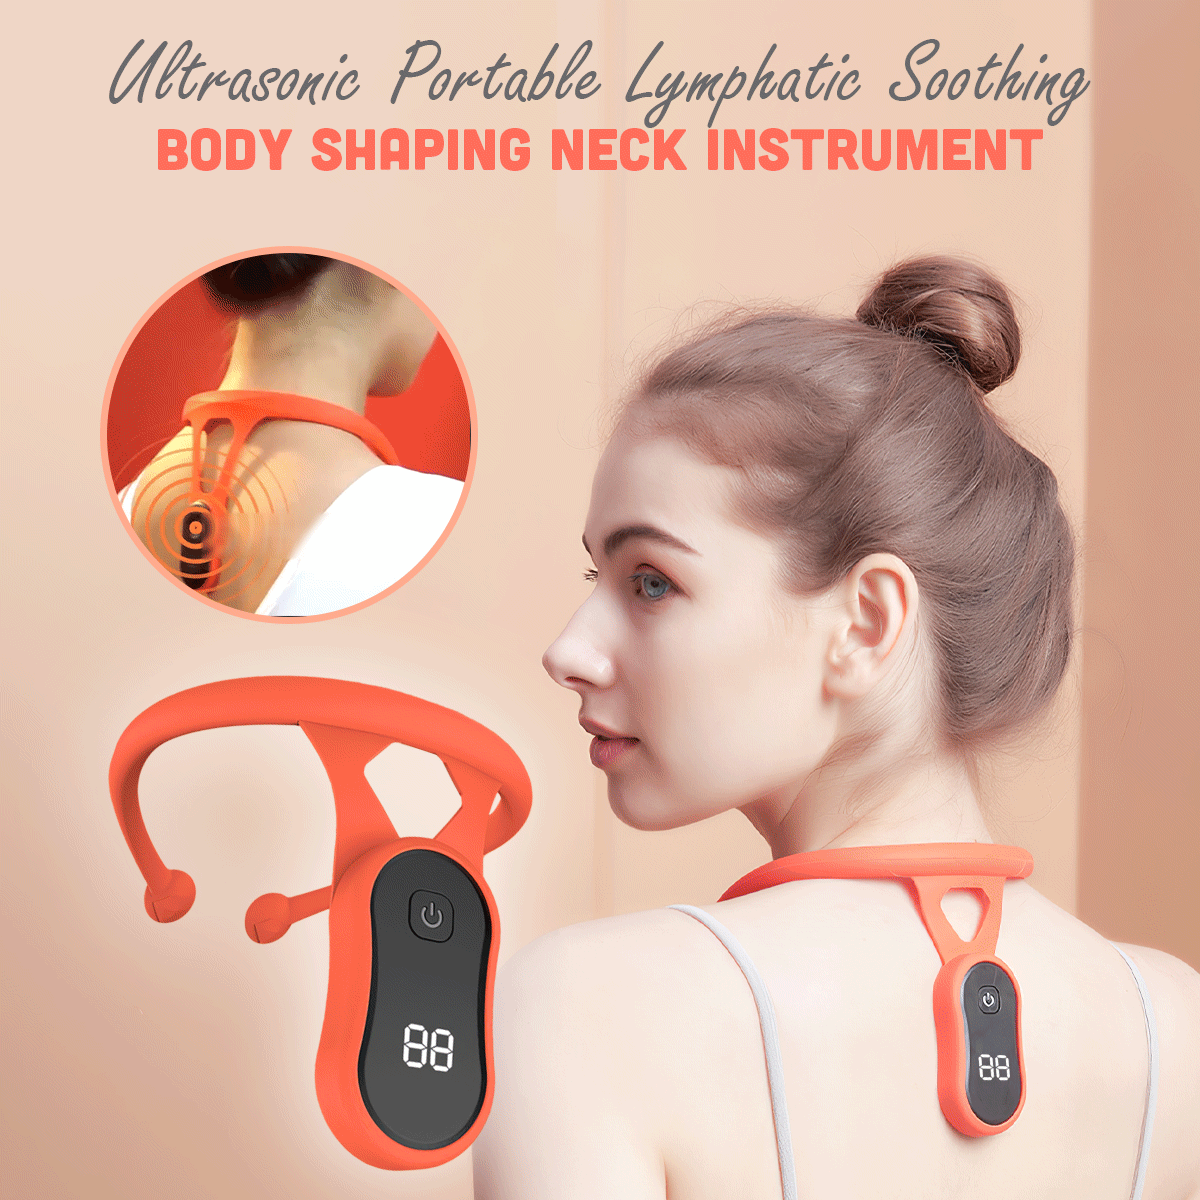 This is a discount for you - Ultrasonic Portable Lymphatic Soothing body shaping Neck Instrument